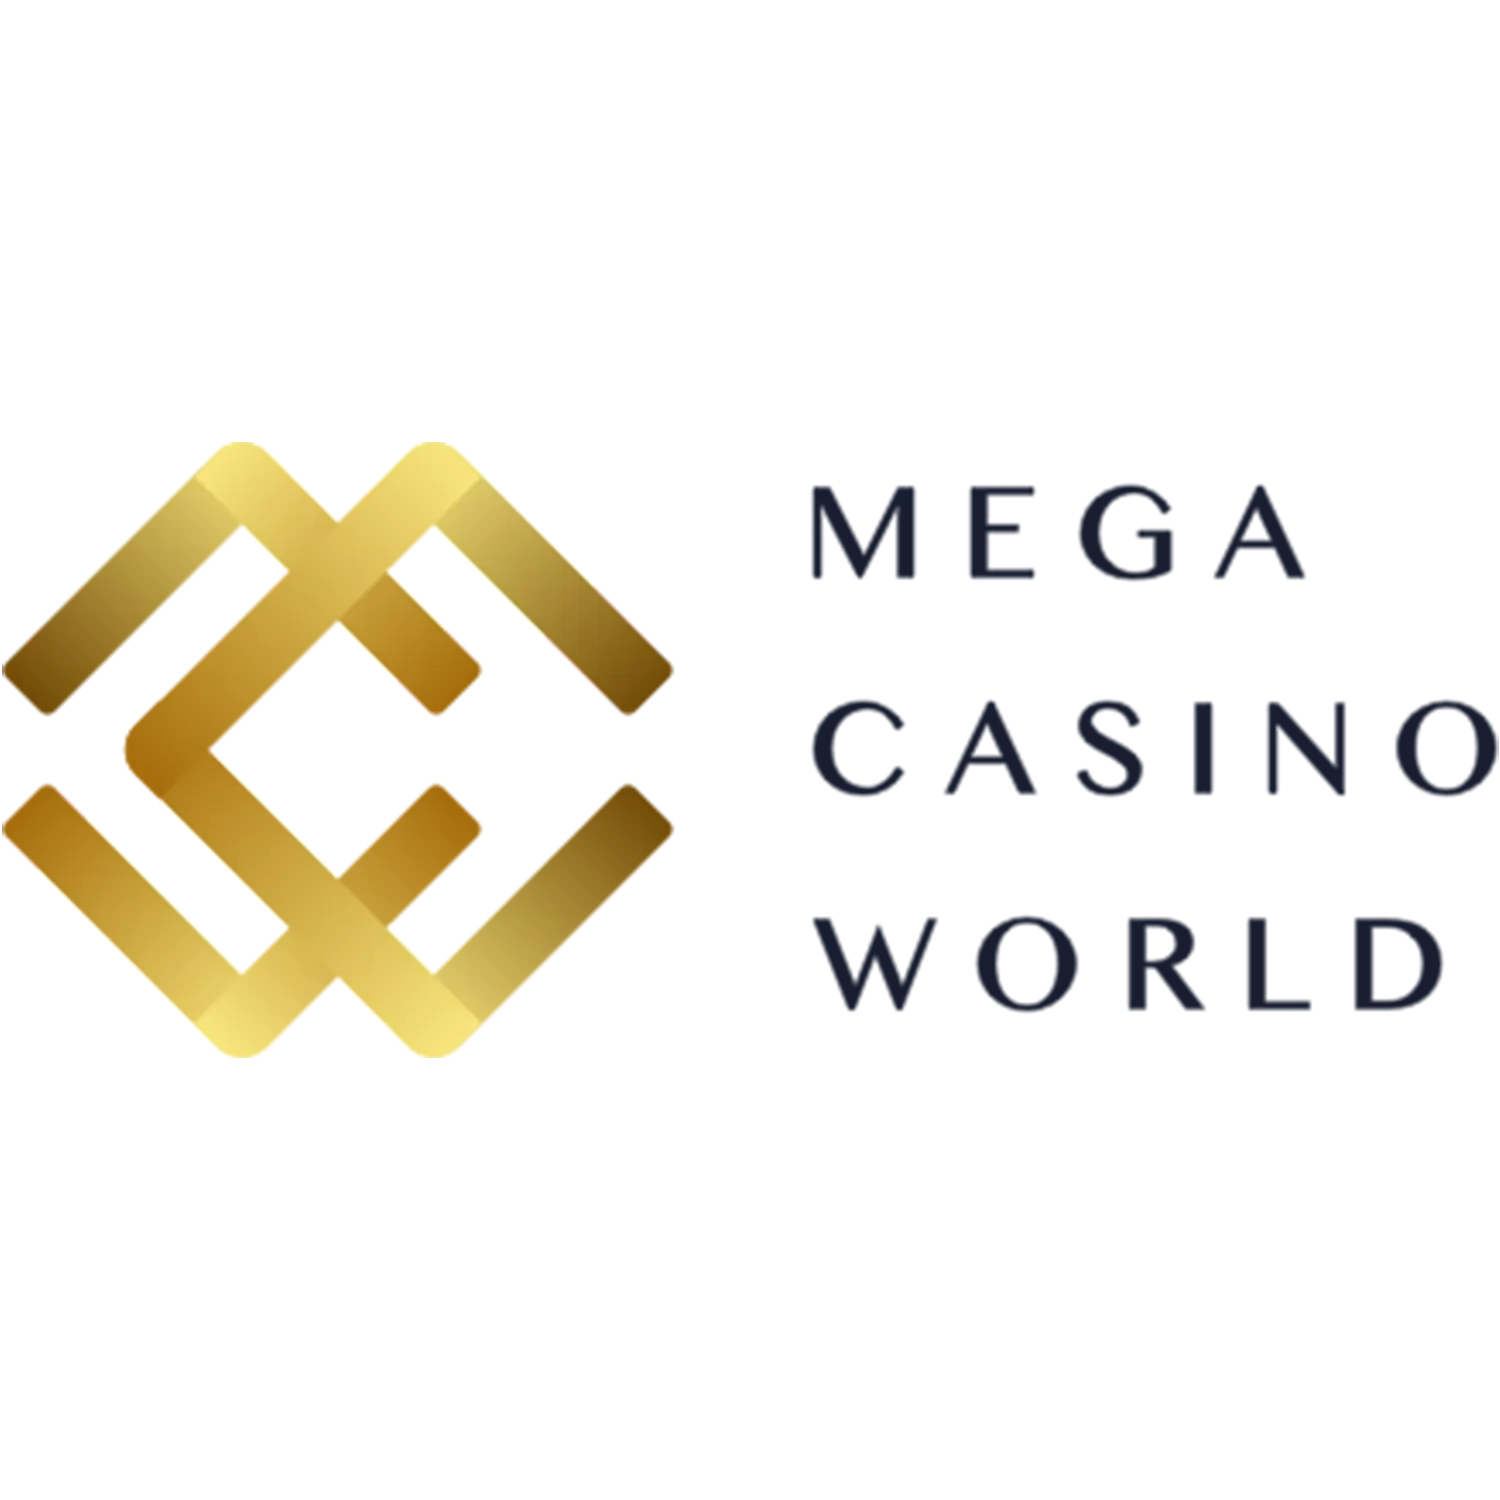 Mega Casino World is a licensed casino and sports betting site.